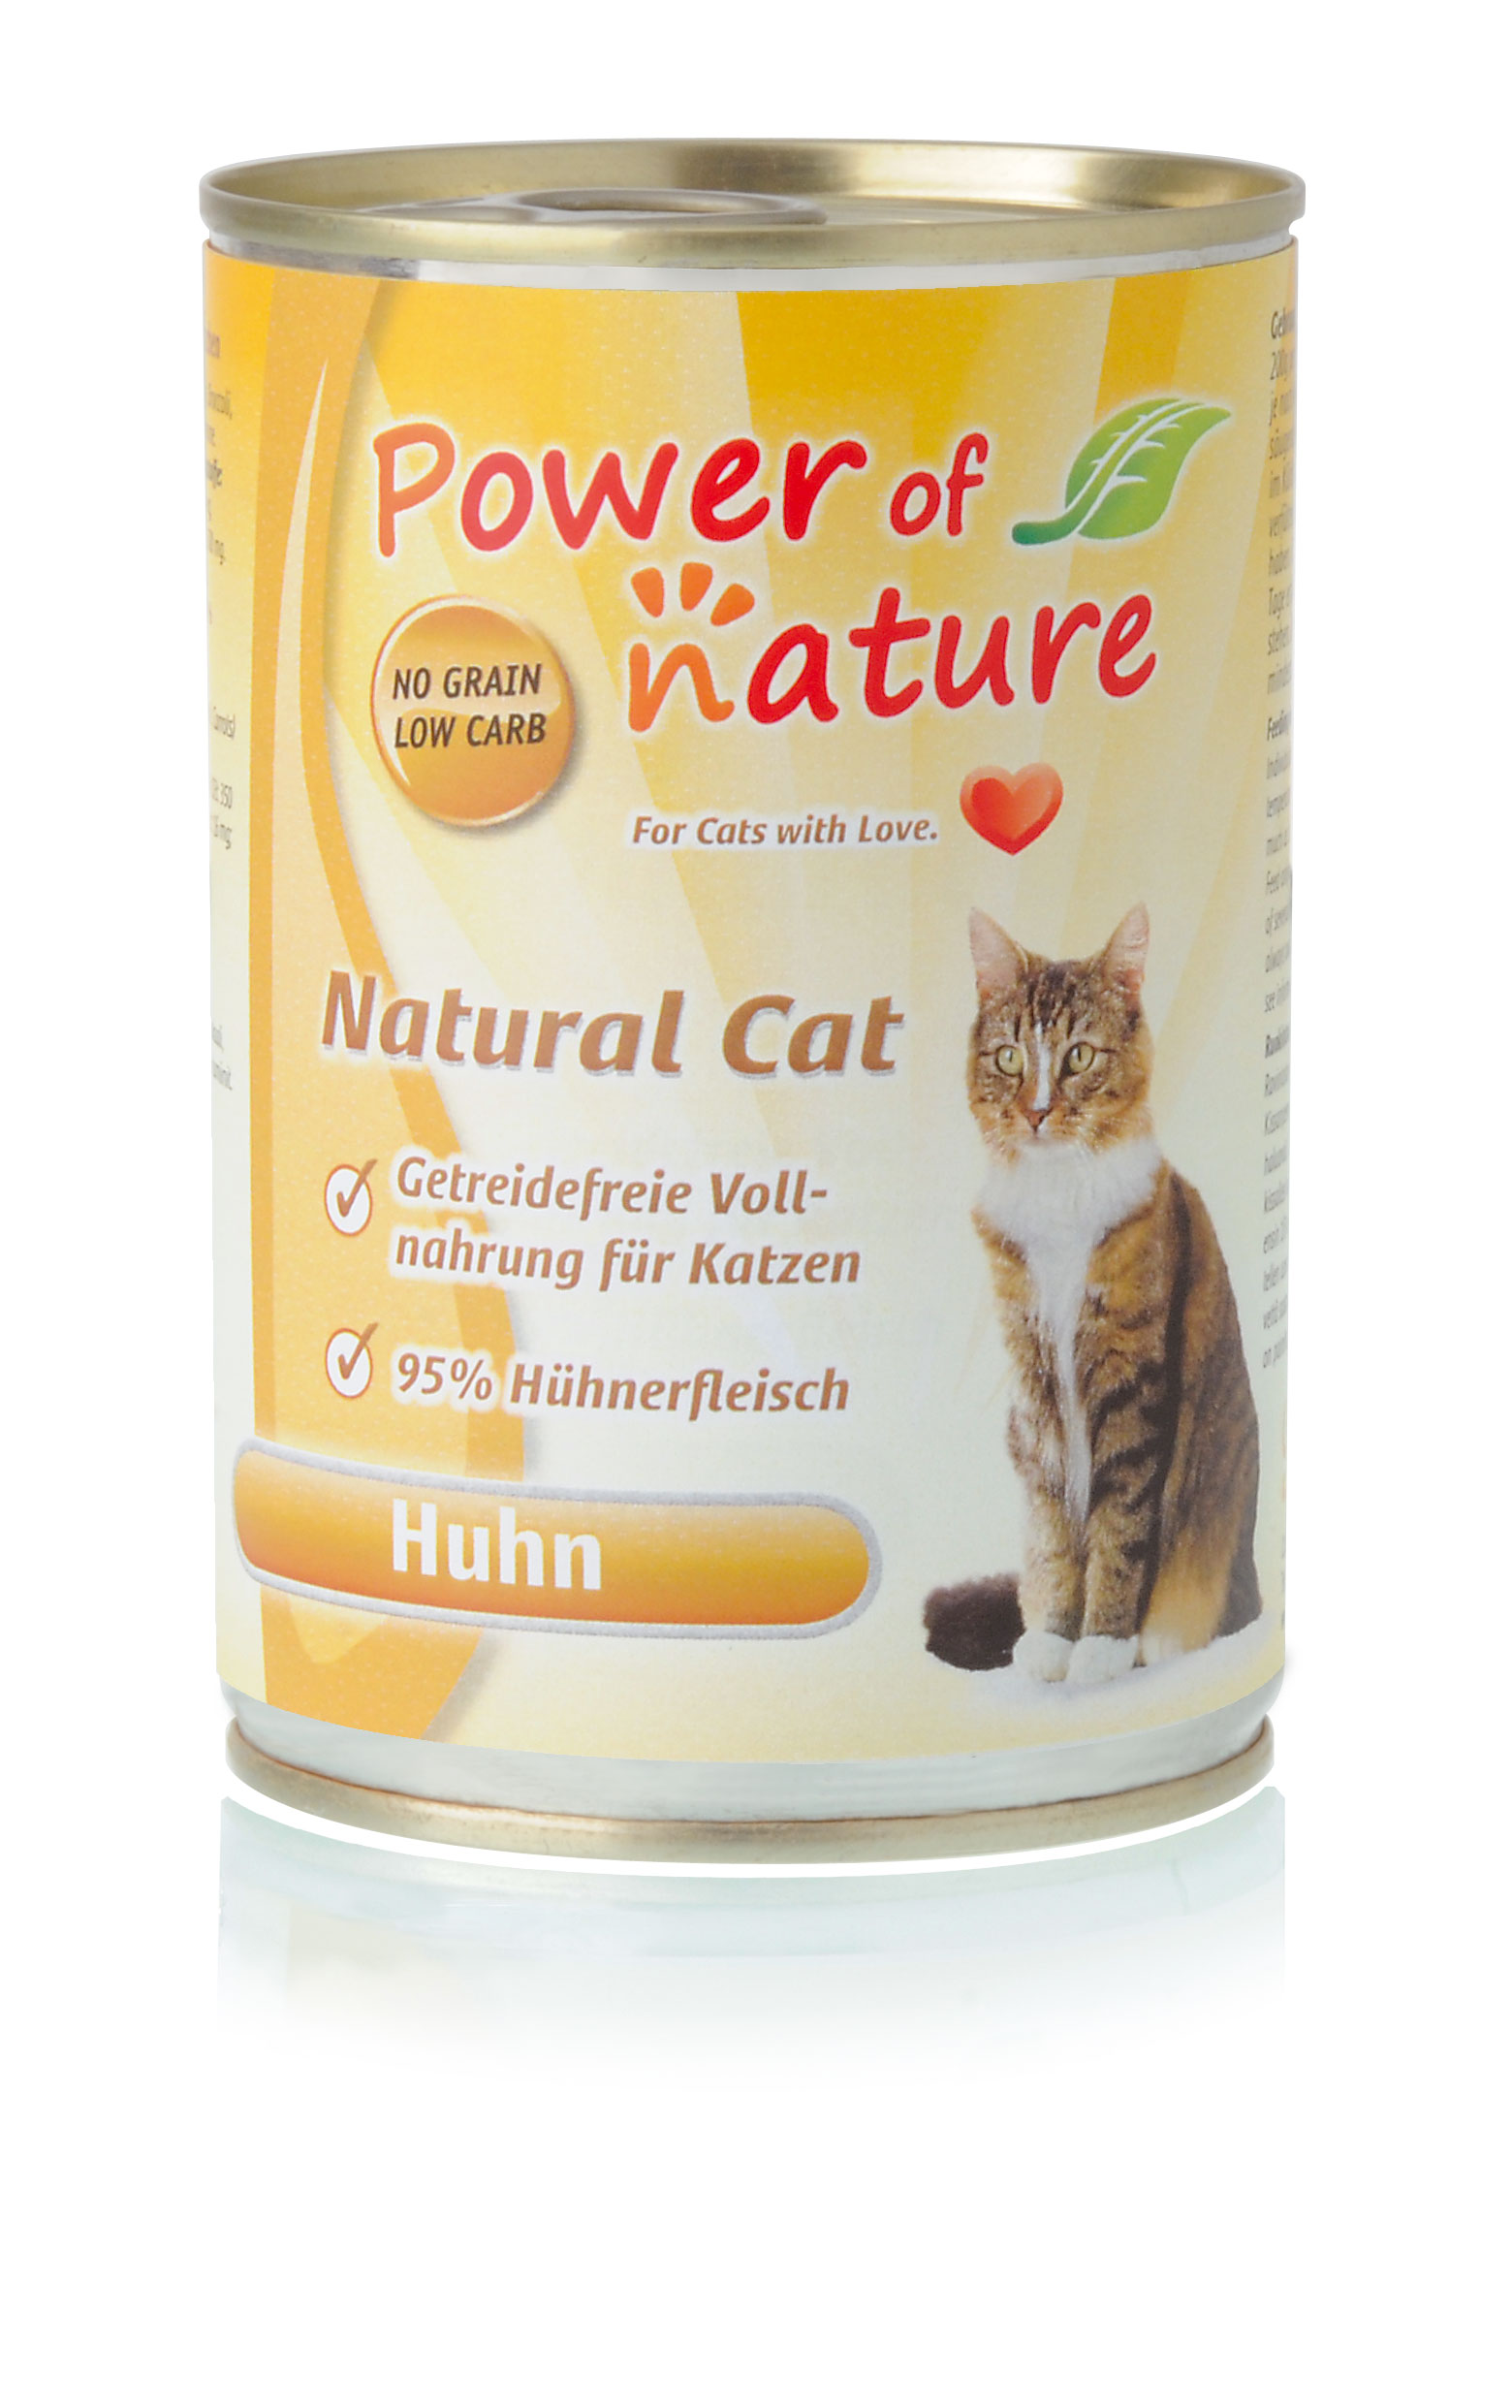 Power of Nature Natural Cat Dose Huhn 24 x 400g